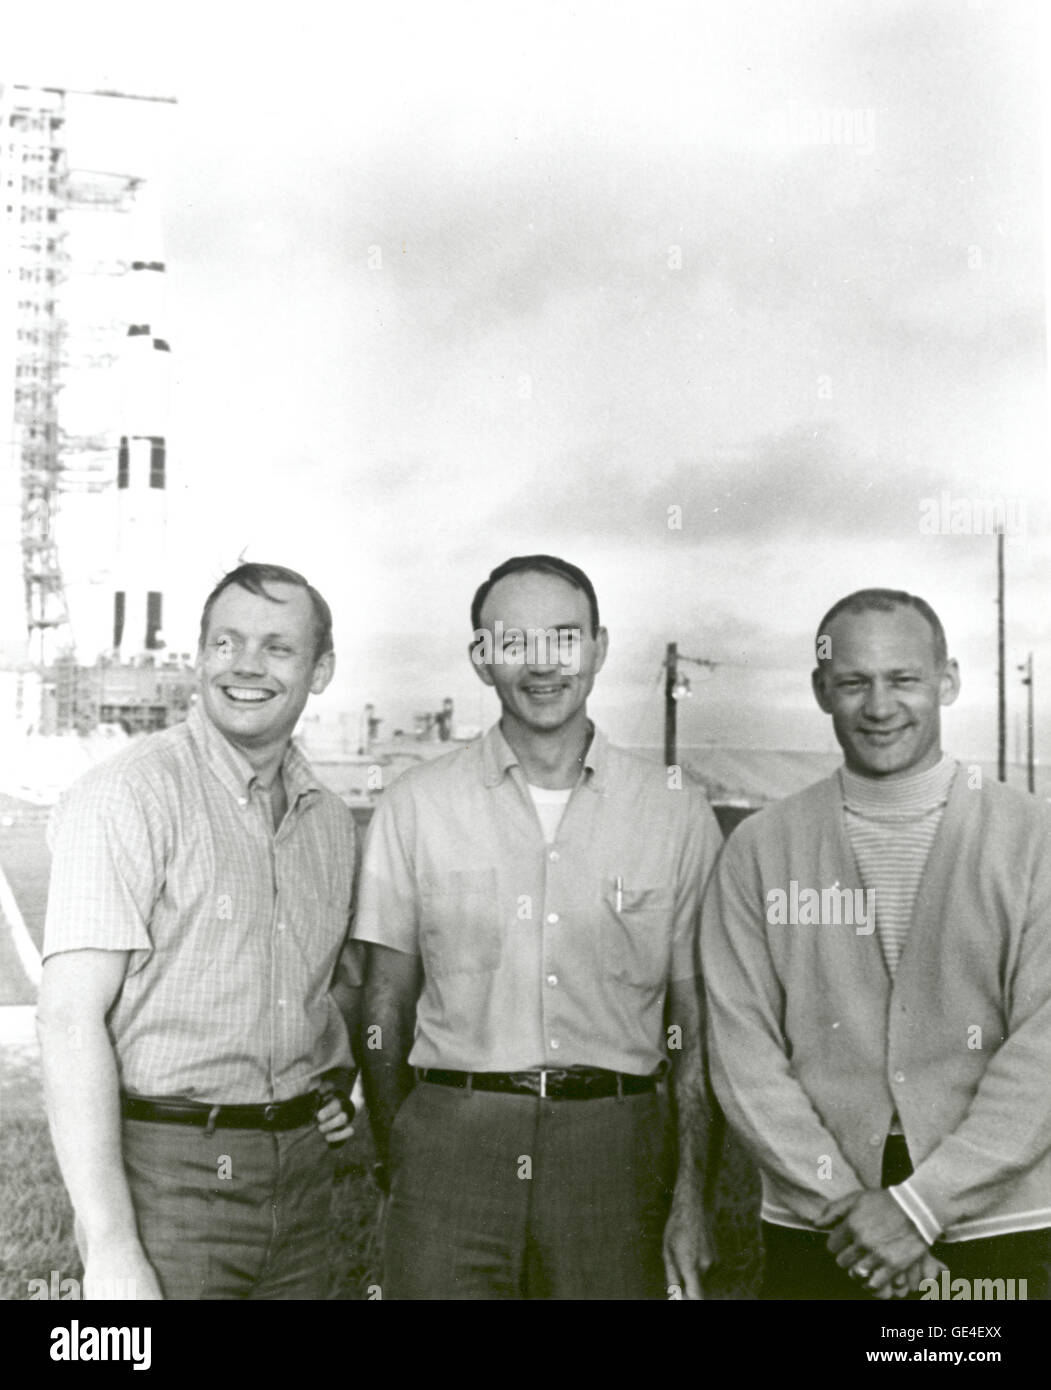 NASA's Apollo 11 flight crew, Neil A. Armstrong, commander; Michael Collins, command module pilot; and Buzz Aldrin, lunar module pilot stand near the Apollo/Saturn V space vehicle that would eventually carry them into space on July 16, 1969.  Image # : 69-H-913  Date: May 20, 1969 Stock Photo